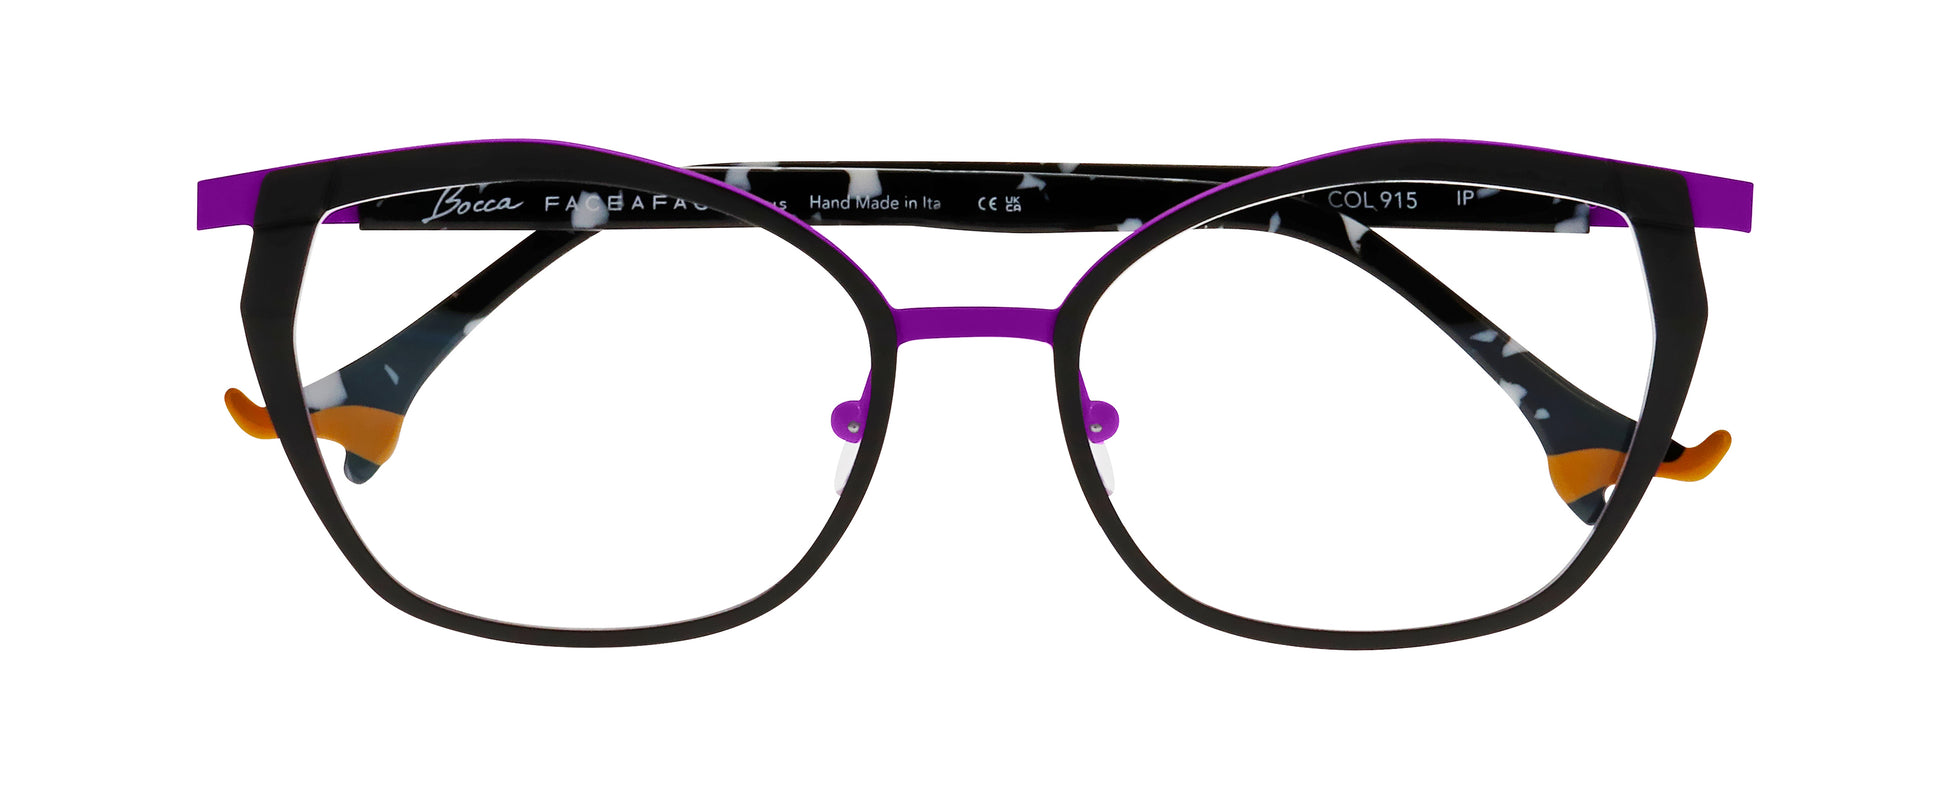 Women's prescription eyewear – A front view of an oval titanium frame that is black and purple in colour.  The black and white speckled temples are finished with orange ladies’ shoe tips